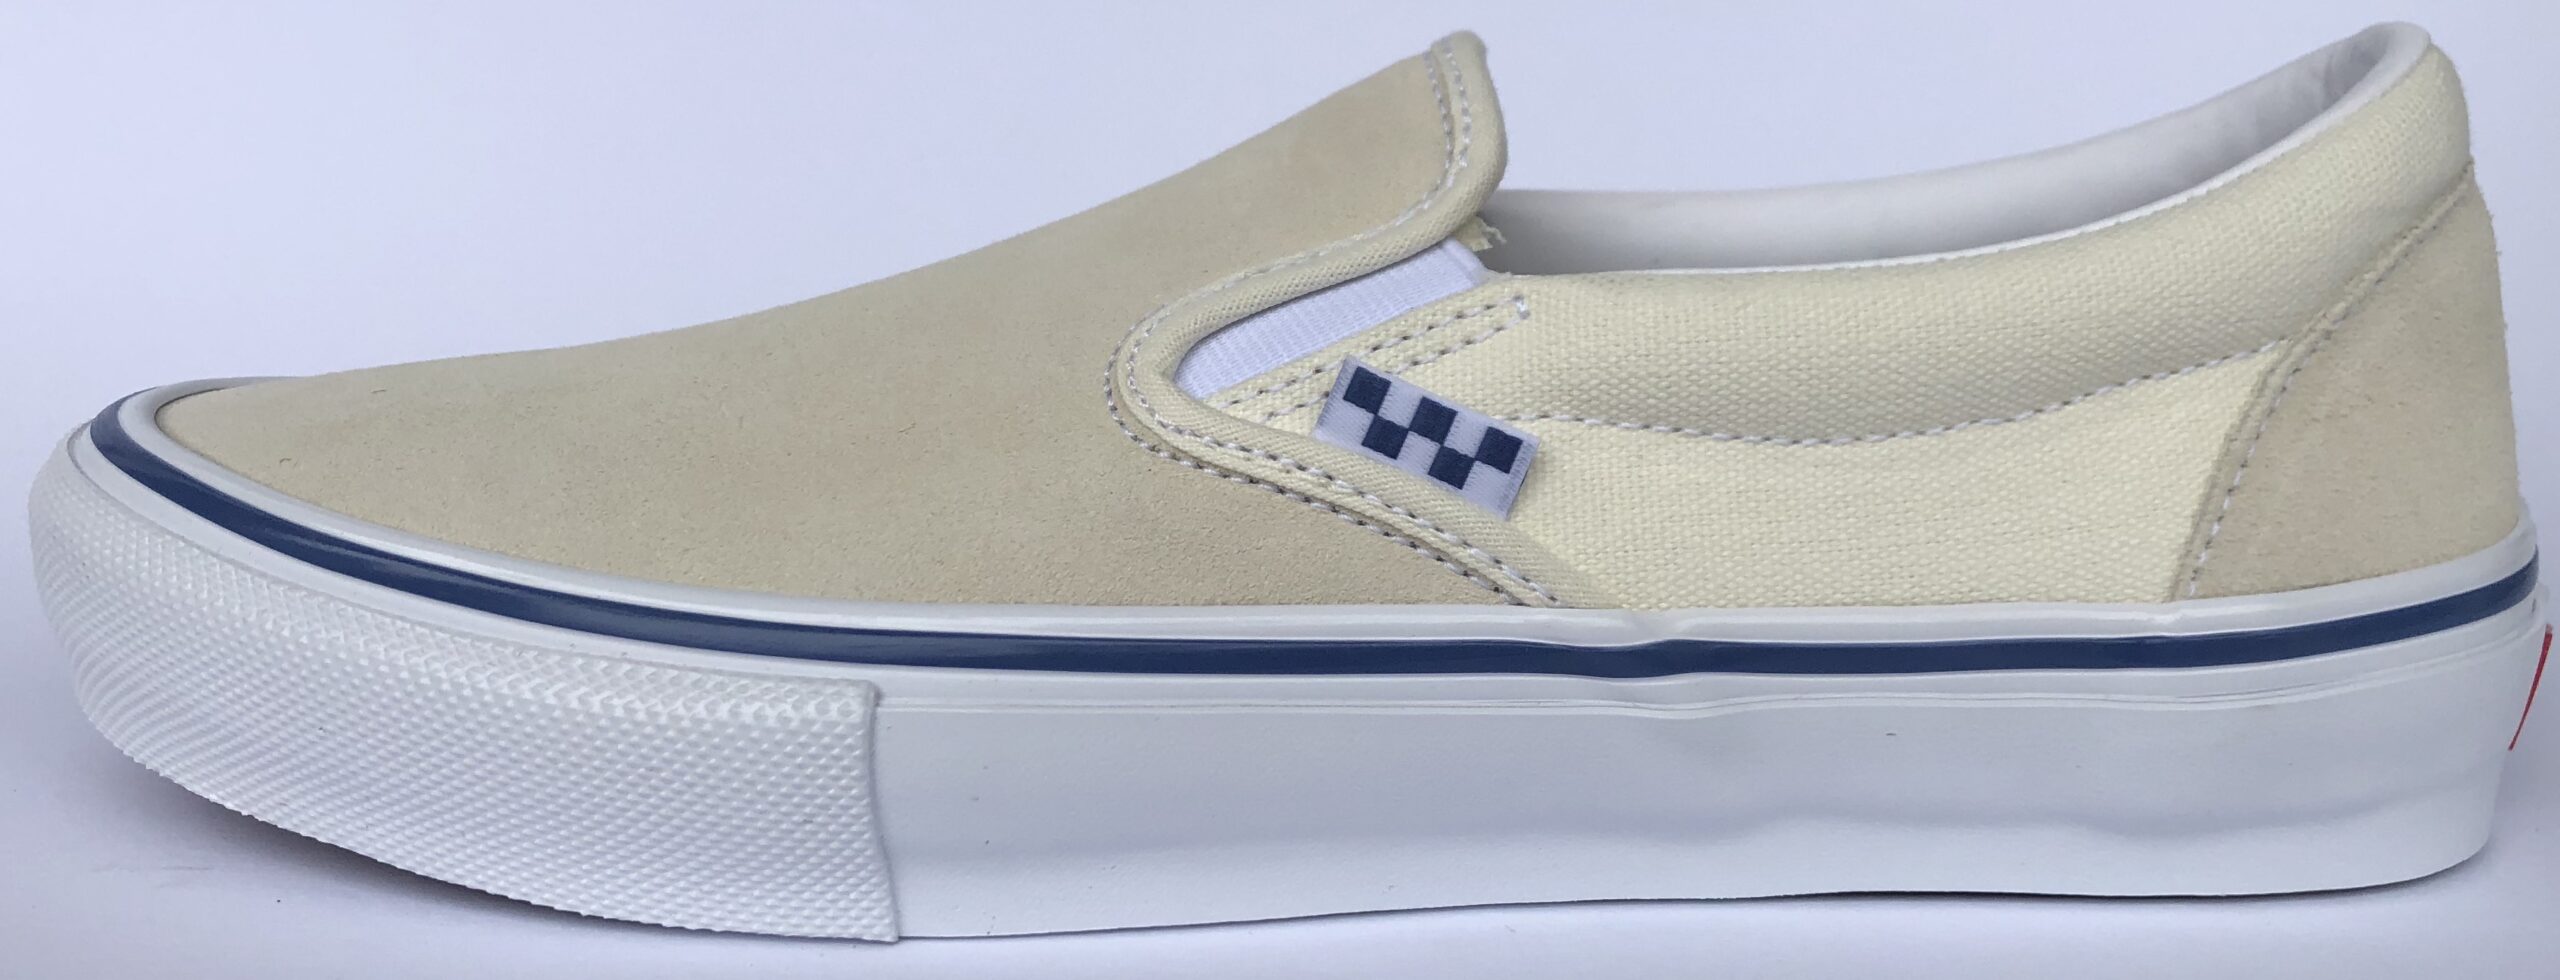 Vans Authentic review: I love the classic skate shoes - Reviewed